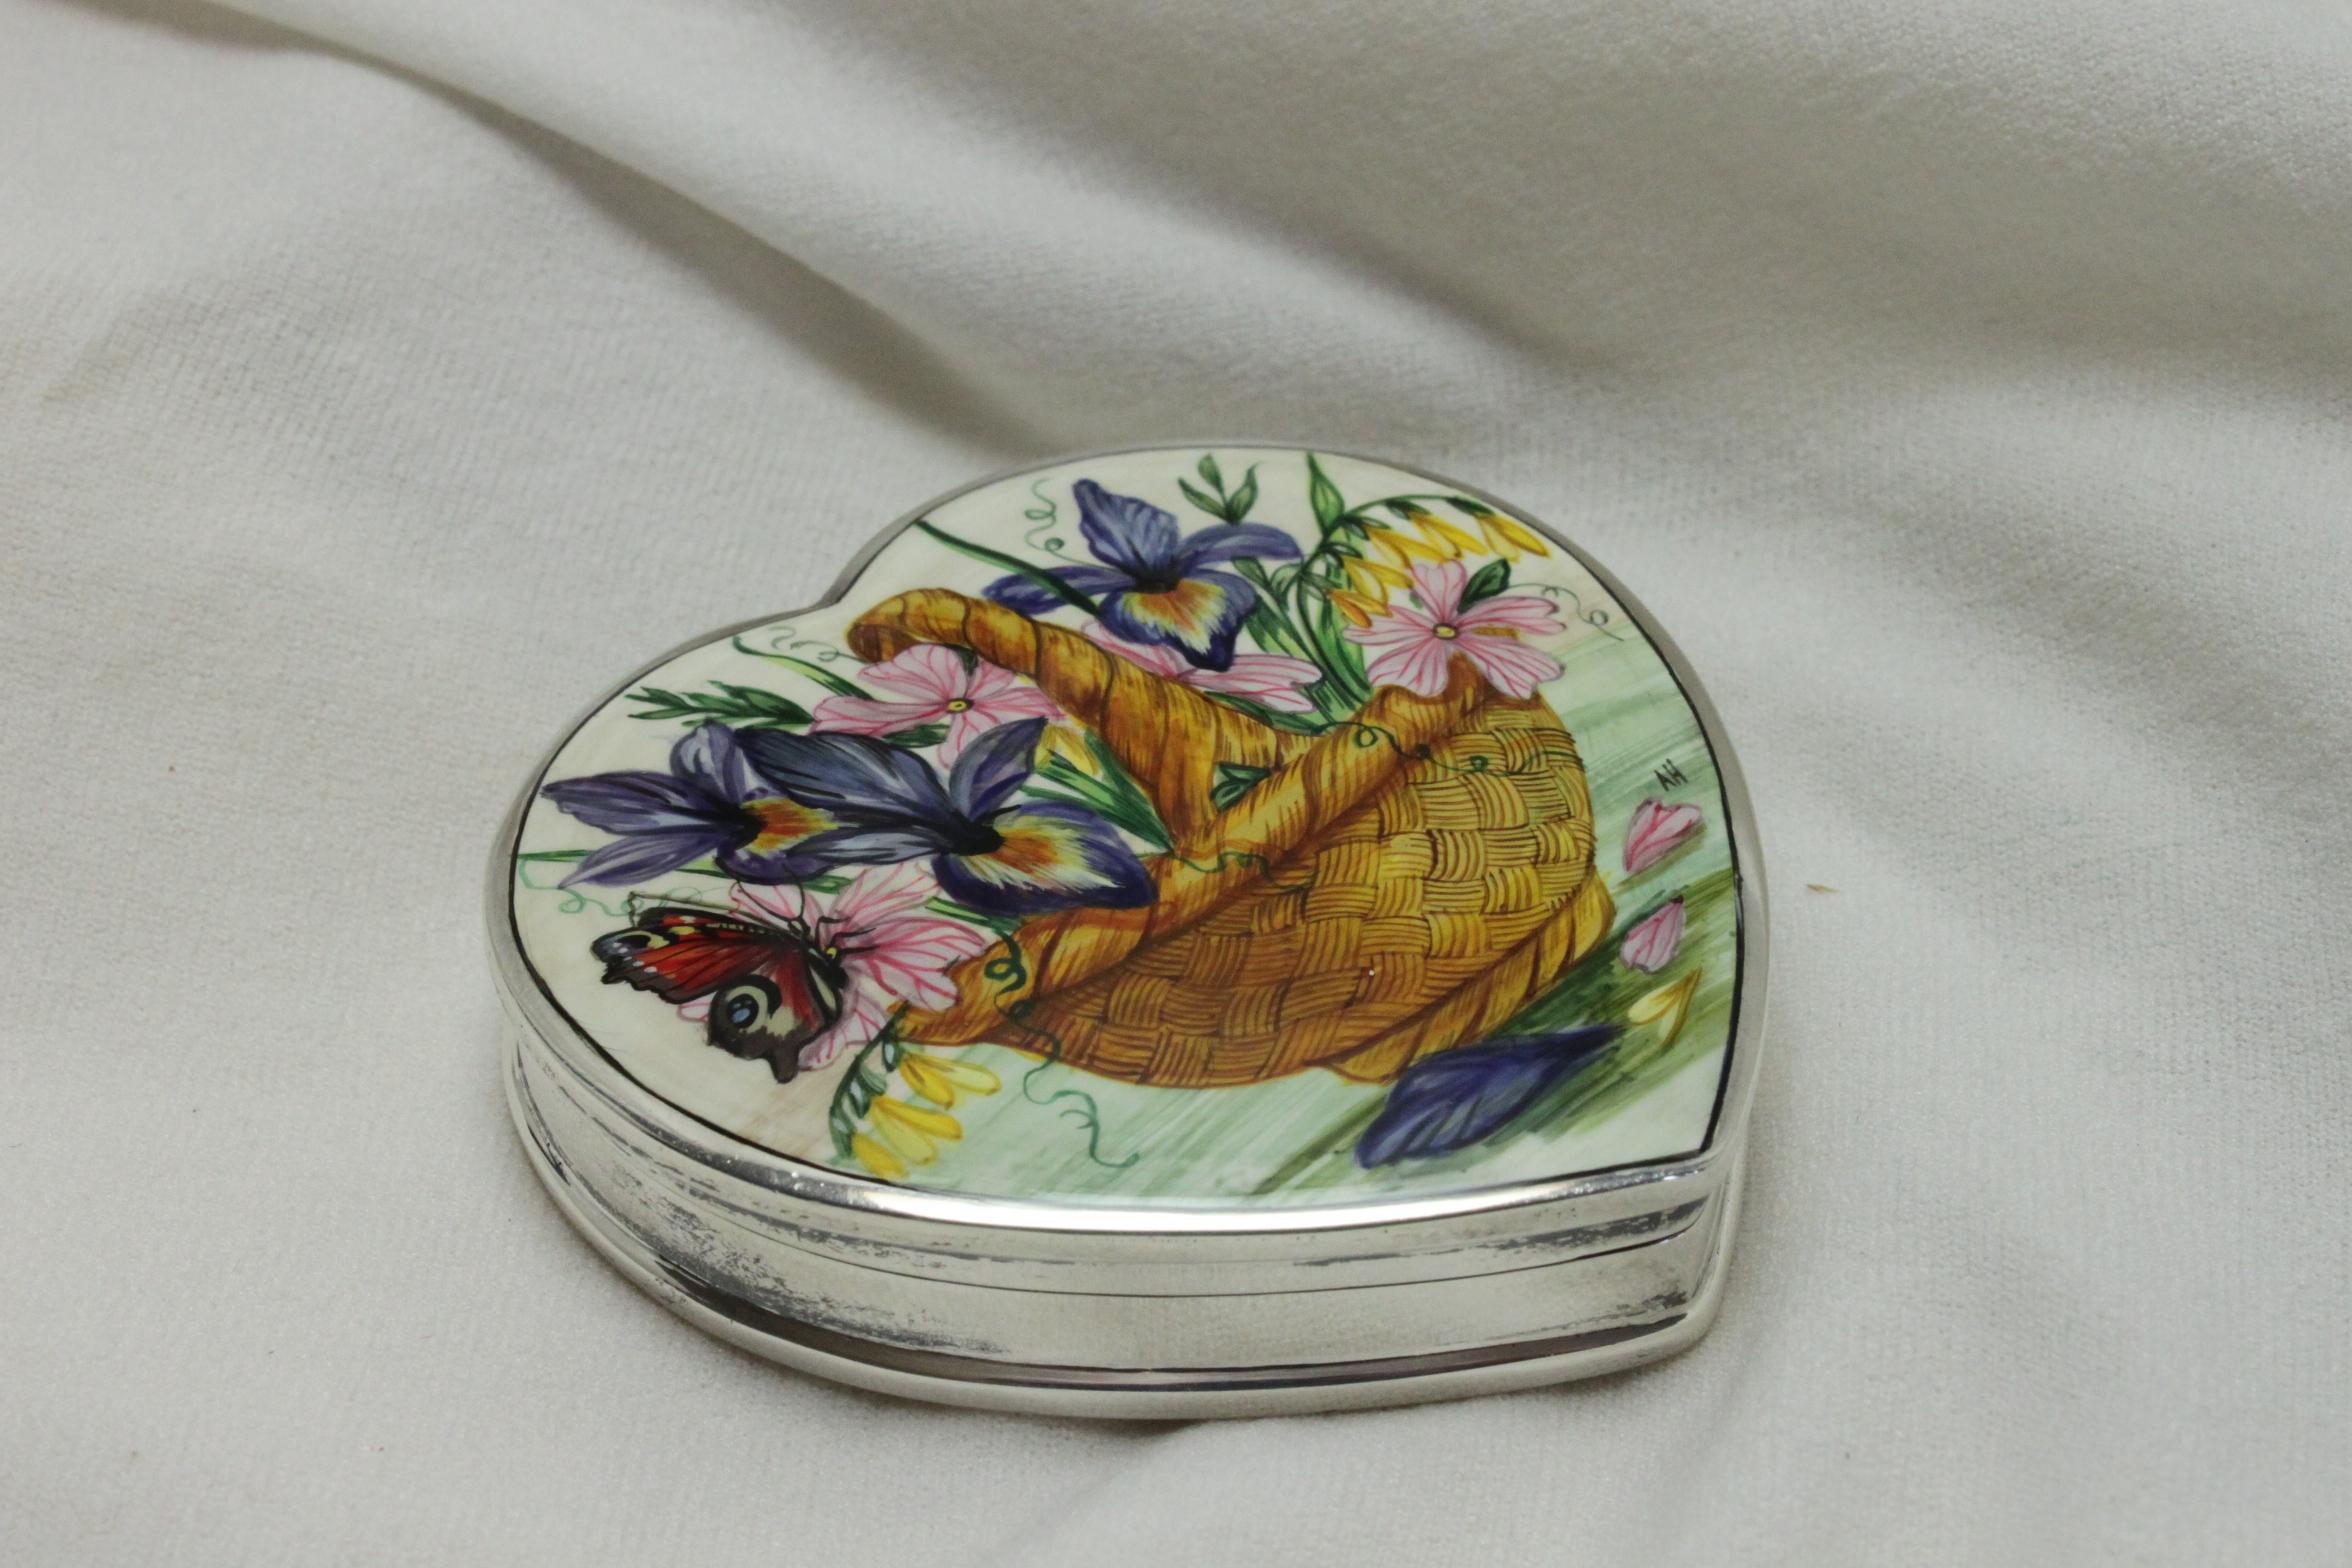 This lovely sterling silver heart shaped trinket, or pill box, has been decorated with a hand painted scene of a wicker basket full of flowers with a butterfly resting on one of the blooms. The painting has been signed AH. It measures 66 mm (2